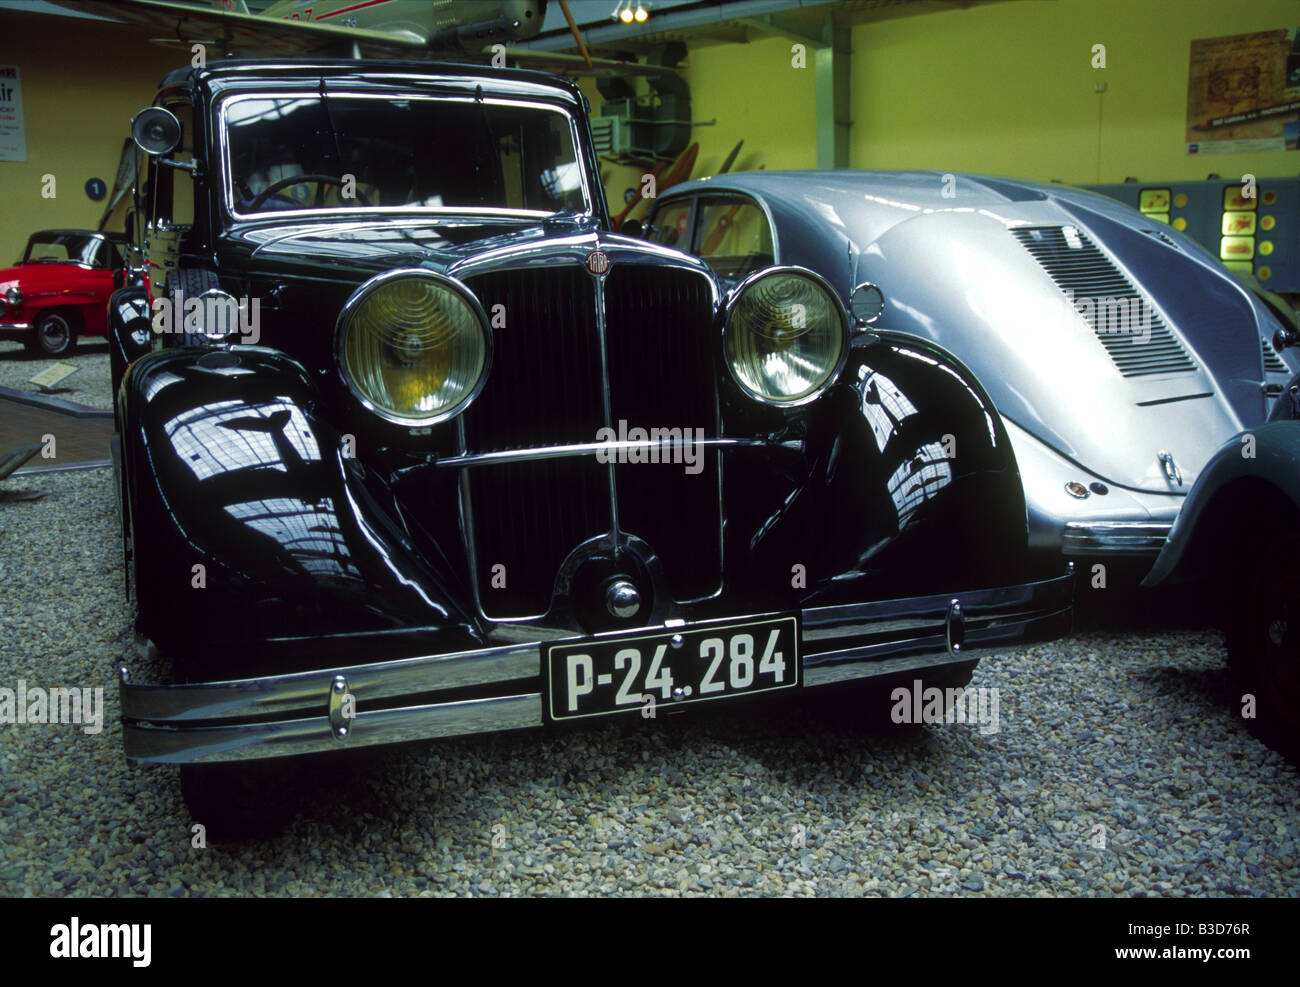 Tatra 80 limousine once owned by Czechoslovakian president Tomáš Garrigue Masaryk in the National Technical Museum in Prague, Czech Republic. Stock Photo